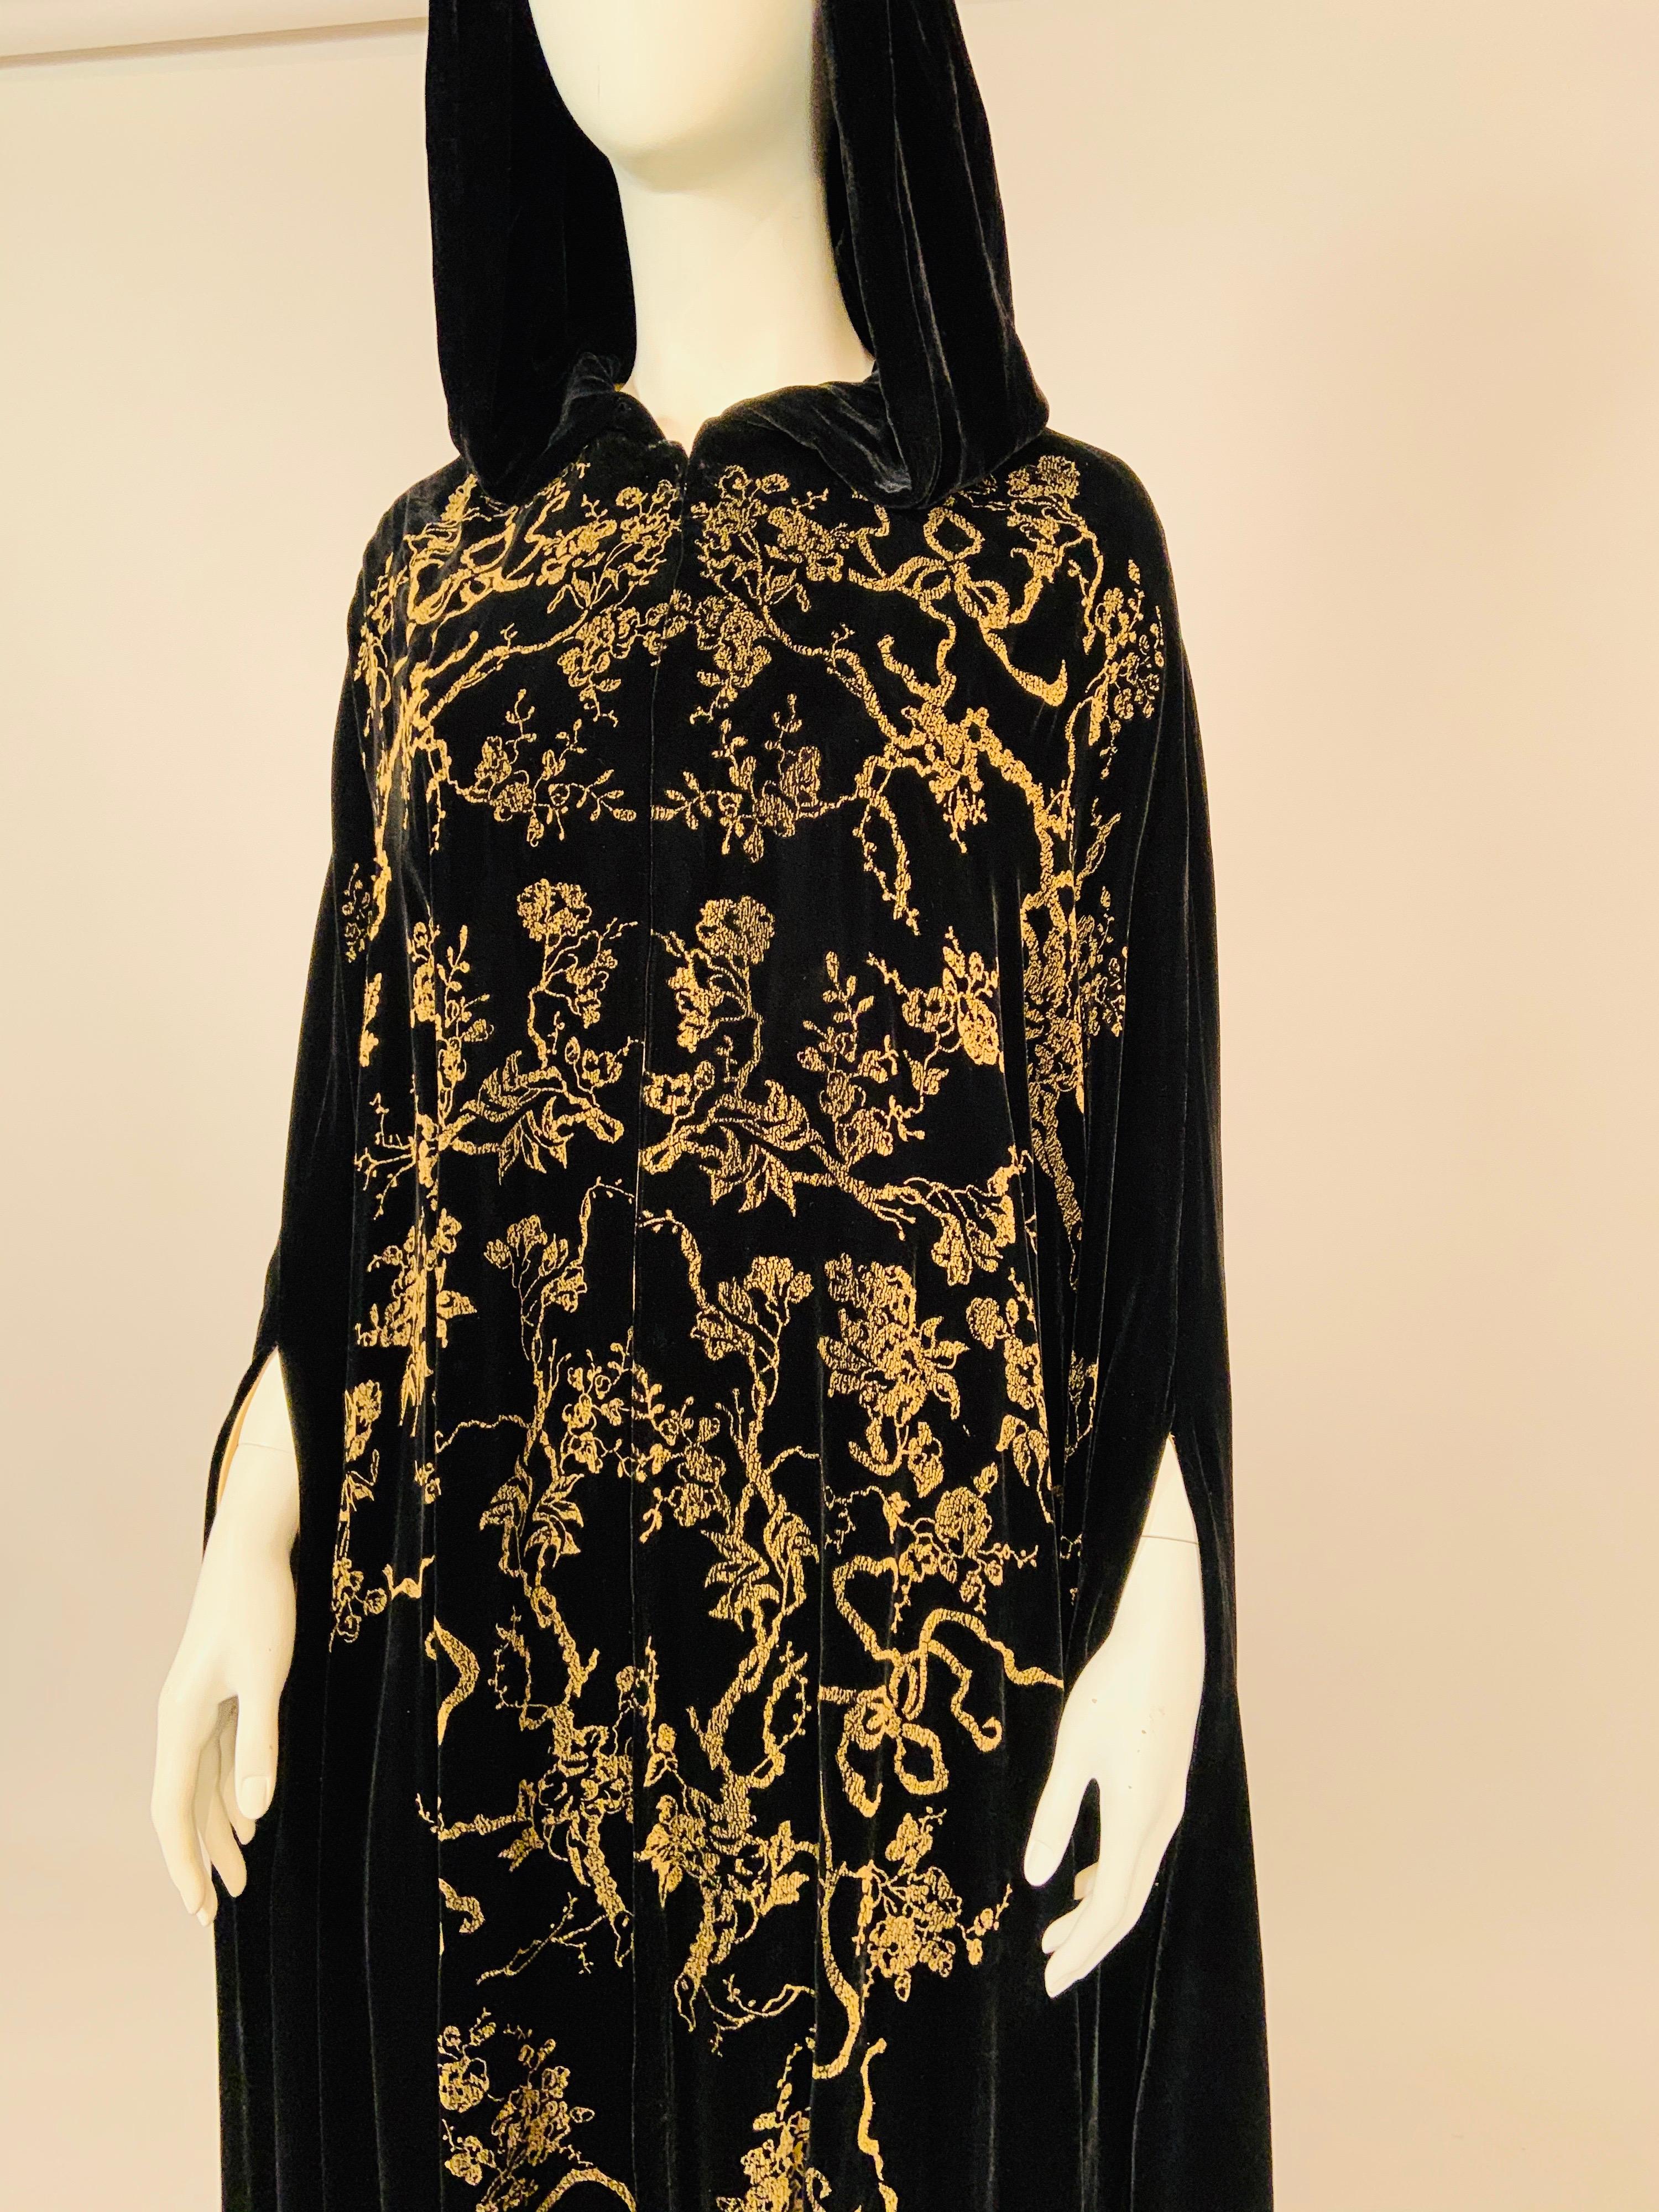 This dramatic gold stenciled black silk velvet hooded cape is designed in the style of Fortuny and Gallenga, who were both famous for their stenciled velvet and cotton garments in the first half of the 20th century. it dates to the 1930's and   has